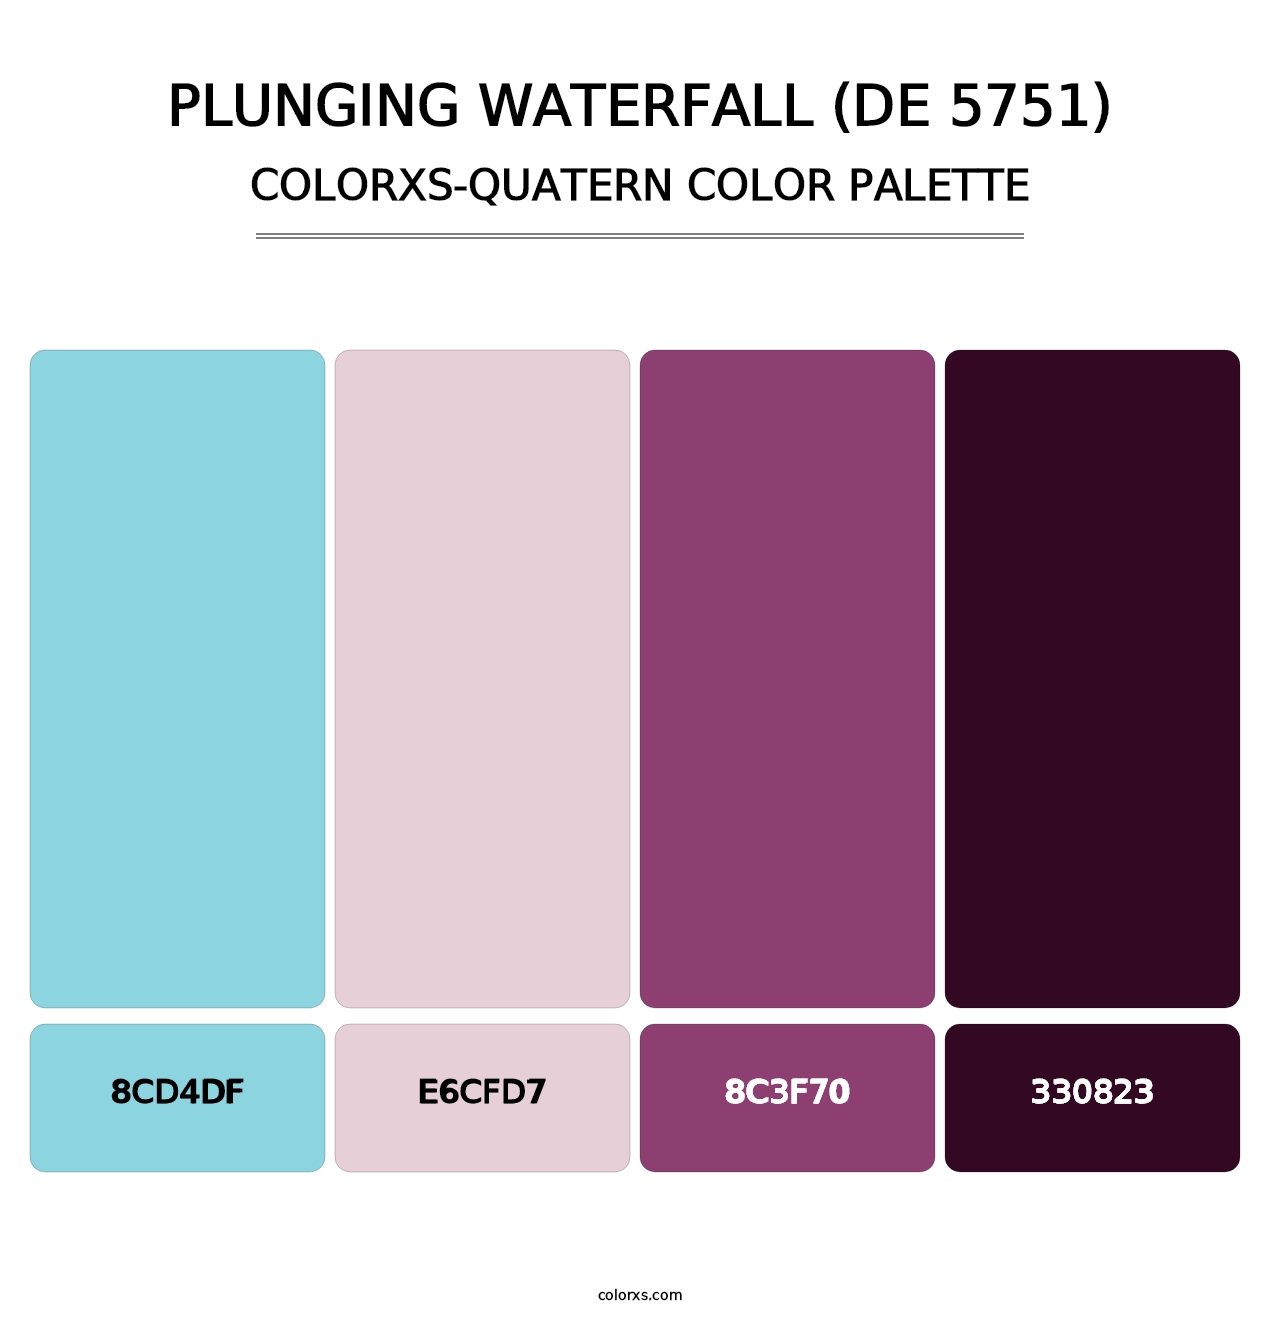 Plunging Waterfall (DE 5751) - Colorxs Quatern Palette